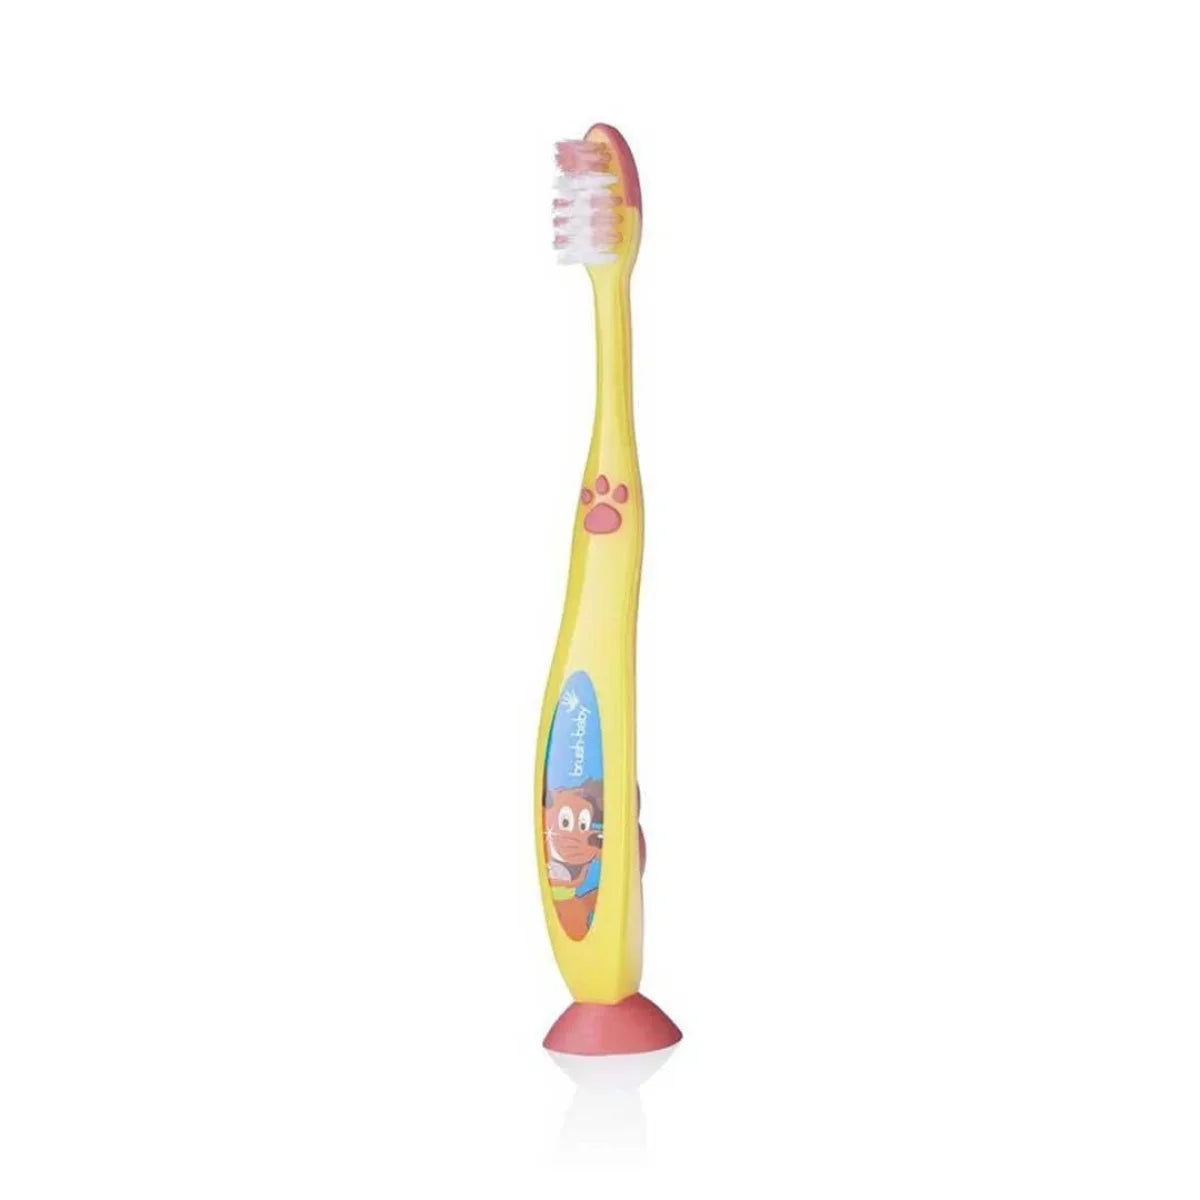 Yellow Brush-Baby manual FlossBrush bristles toothbrush for kids 6+ Years in Value Pack of 12 